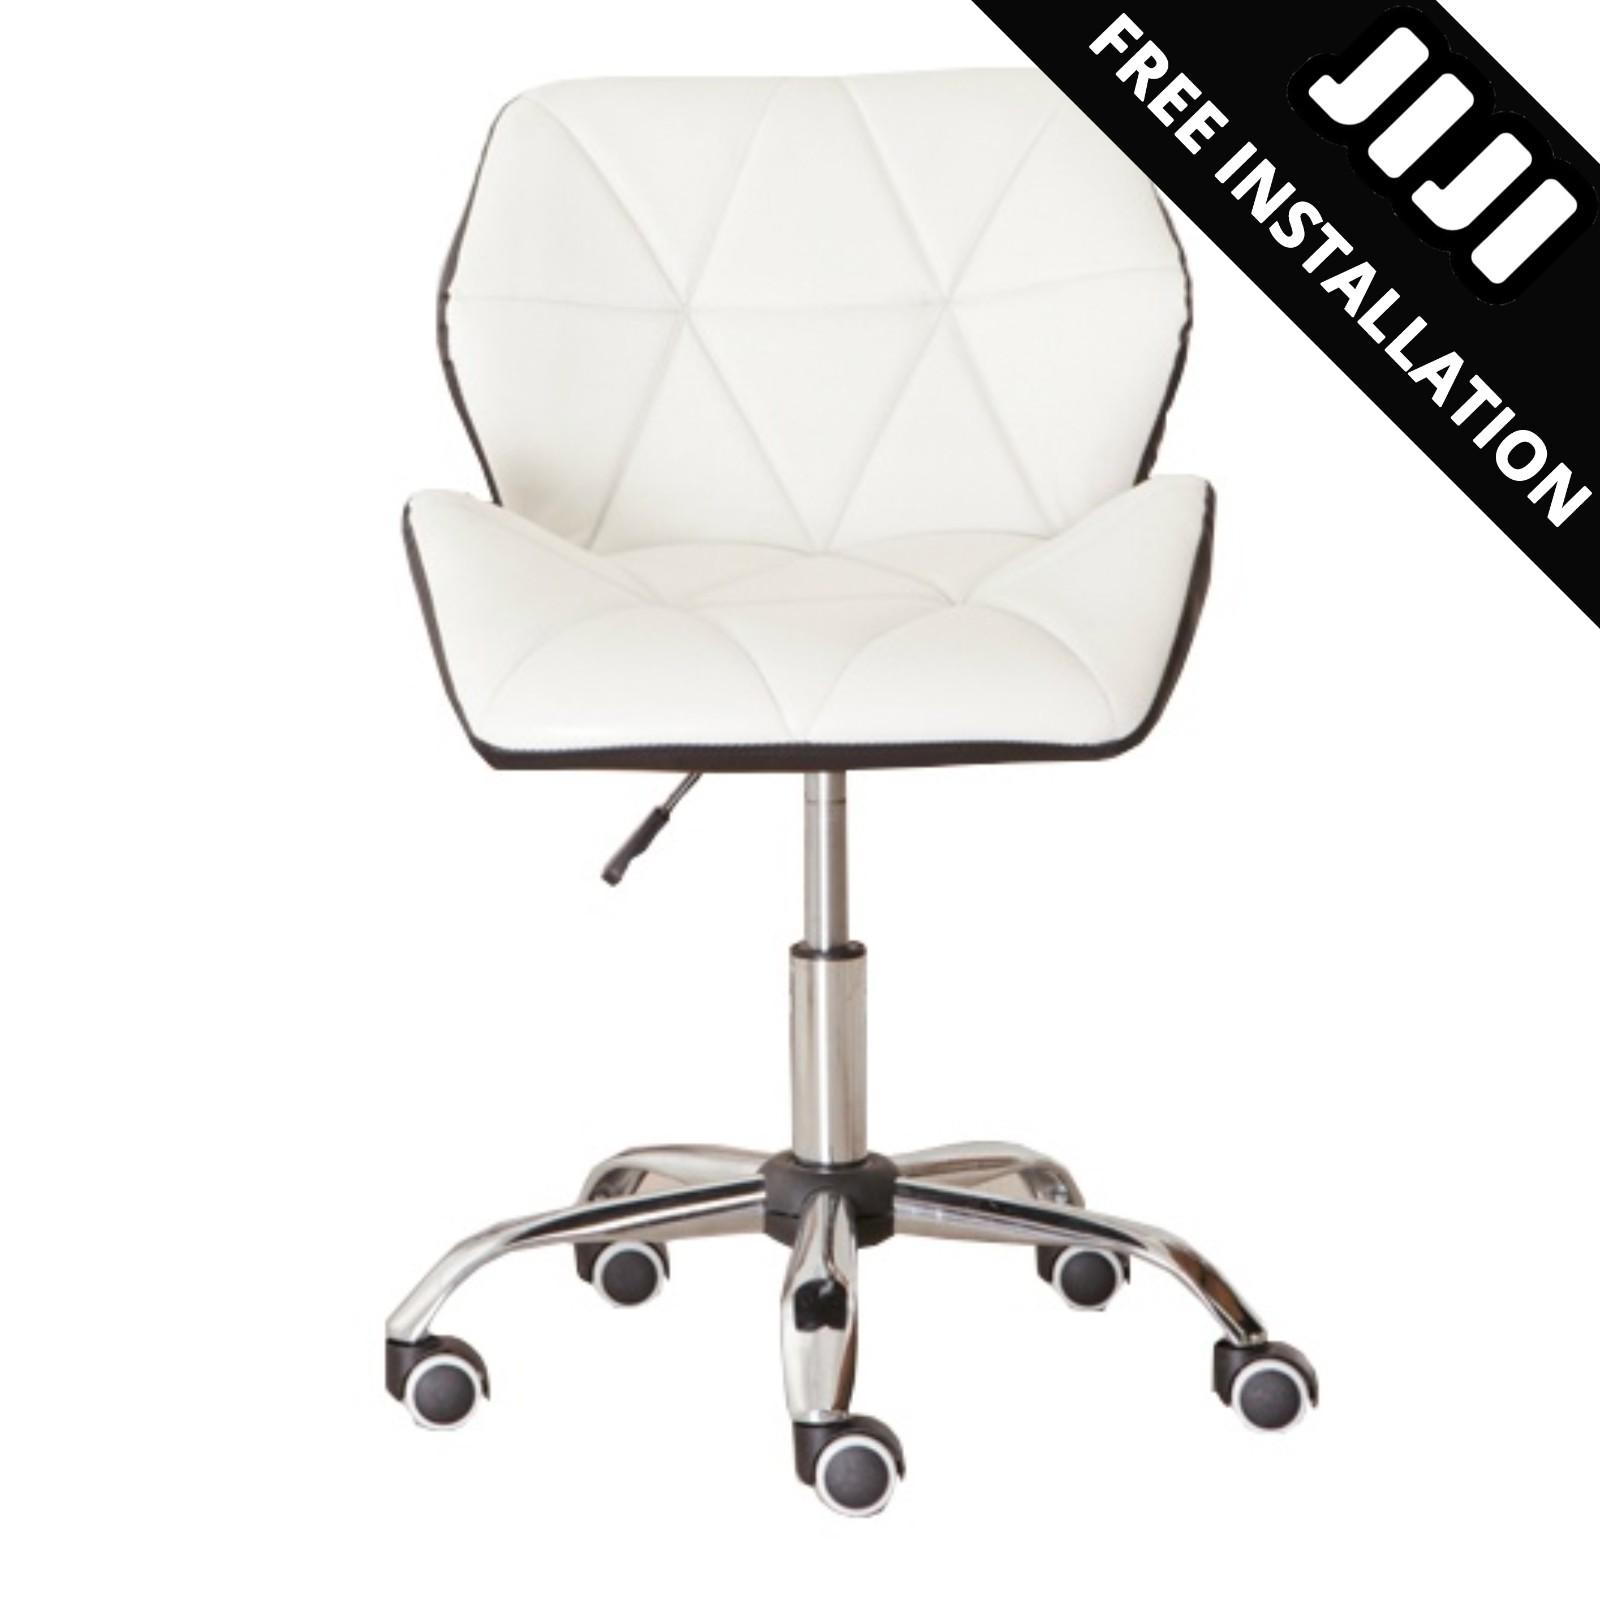 Jiji Office Chair Supervisor Chair Ver 4 Free Installation